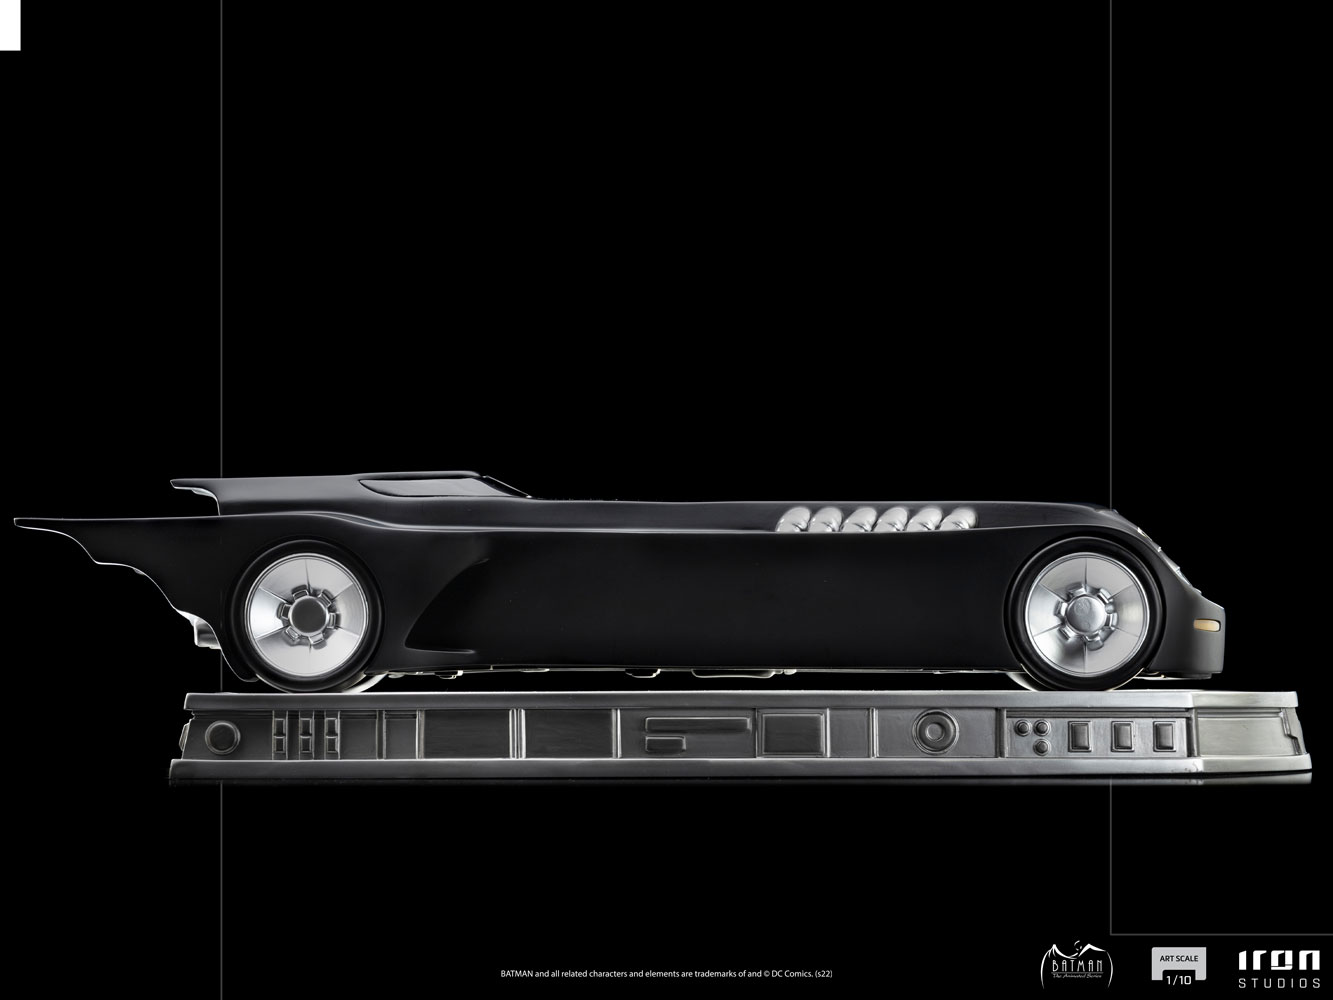 Crossing the streets of Gotham City, a high-speed black car with jet exhaust appears. With a design that brings retro elements in perfect harmony with modern and bold features endowed with high technology, Iron Studios proudly present the statue “Batmobile – Batman The Animated Series – Art Scale 1/10”, with the hooded crusader most iconic vehicle, from the acclaimed animated series developed by Bruce Timm and Paul Dini, celebrating the 30 years of success of the series that is considered by many the best Dark Knight’s adaptation for other media. Produced by Warner Bros. Animation between 1992 and 1995, Batman: The Animated Series is widely praised and commended by its noir aesthetics and thematic complexity, its success led it to win four Emmy awards, including Outstanding Animated Series. Designed and built by Earl Cooper, a Global Motors top car designer saved by Batman, as seen in the episode “The Mechanic”, the 48th episode of the series, the Batmobile was inspired by a vehicle Bruce Wayne saw on Gotham\’s World\’s Fair when he was young, fact that was presented in the feature film derived from the series, Batman: Mask of the Phantasm from 1993. This Batmobile look (the second produced by Iron Studios) also brings references to the version presented in Batman’s movie from 1989, that also got an Art Scale 1/10 statue made previously by Iron Studios.